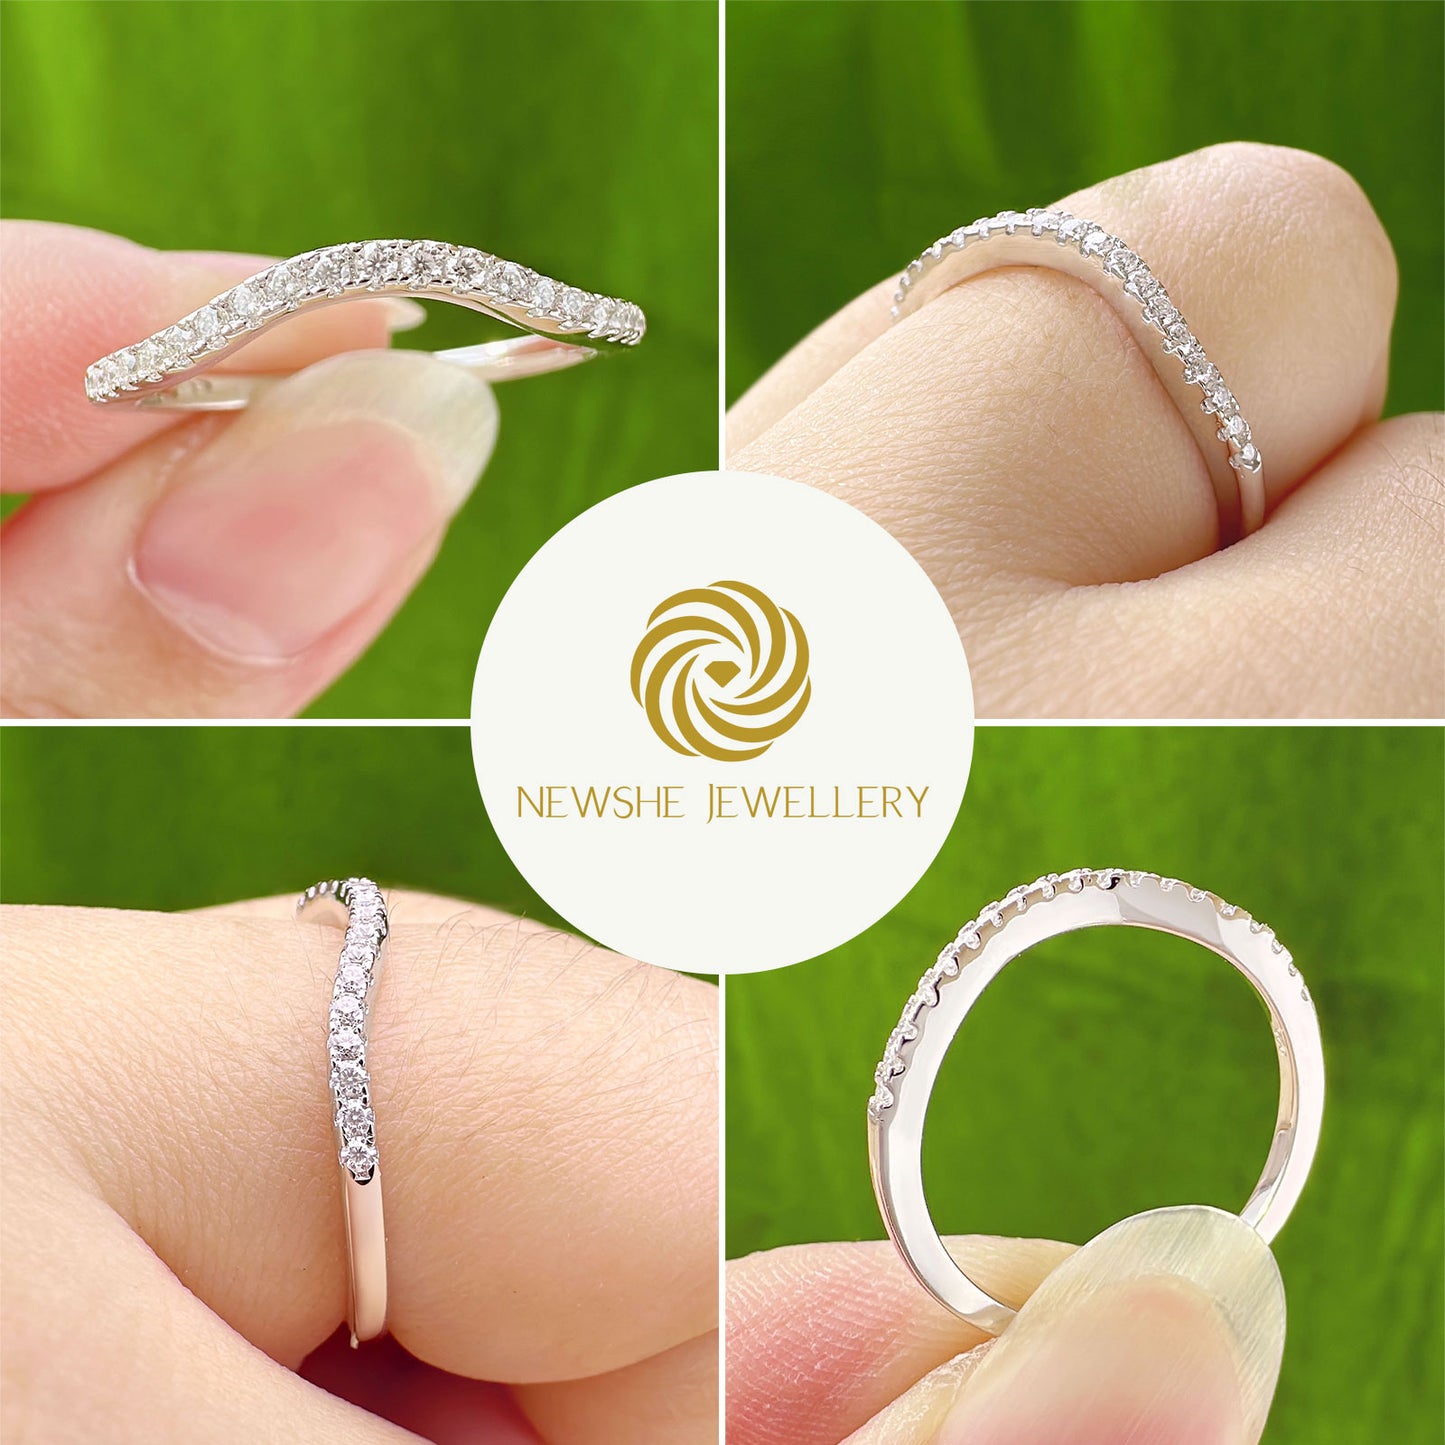 Newshe Jewellery Moissanite Curved Wedding Bands for Her Stacking Eternity Rings 925 Sterling Silver Wishbone Size 5-10